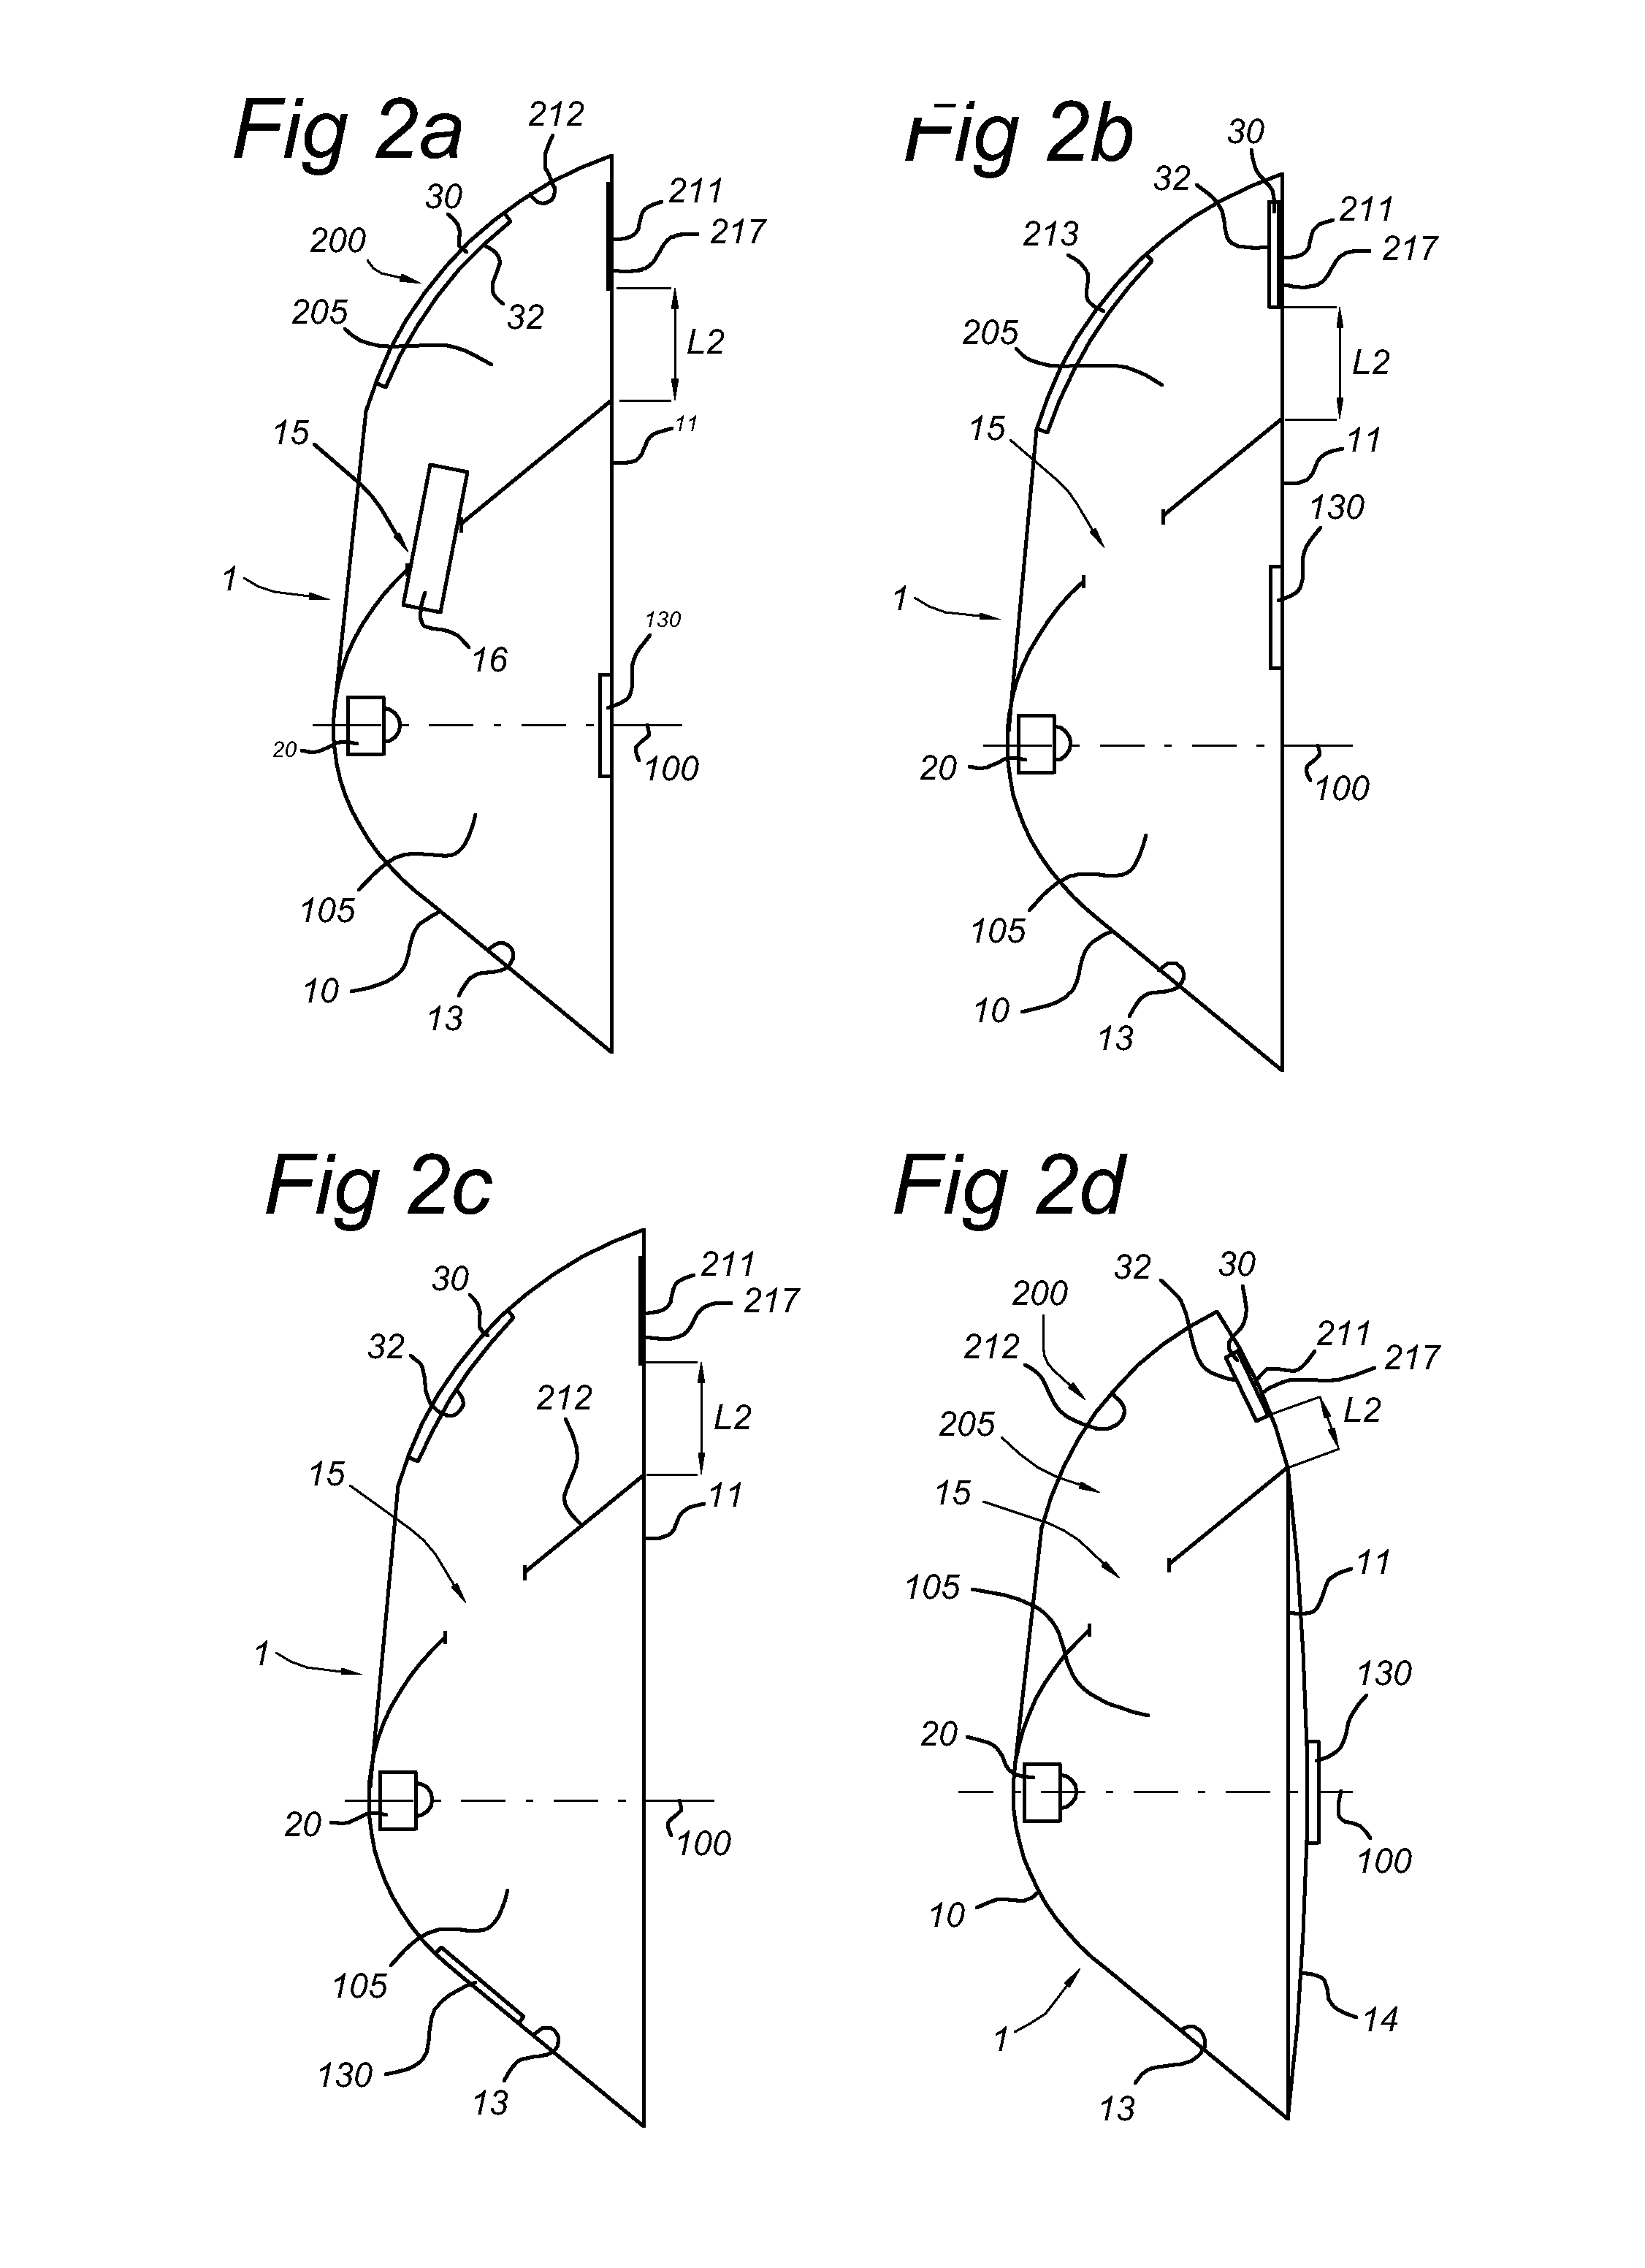 Car lighting unit for generating a beam of light and a holographic 3D image